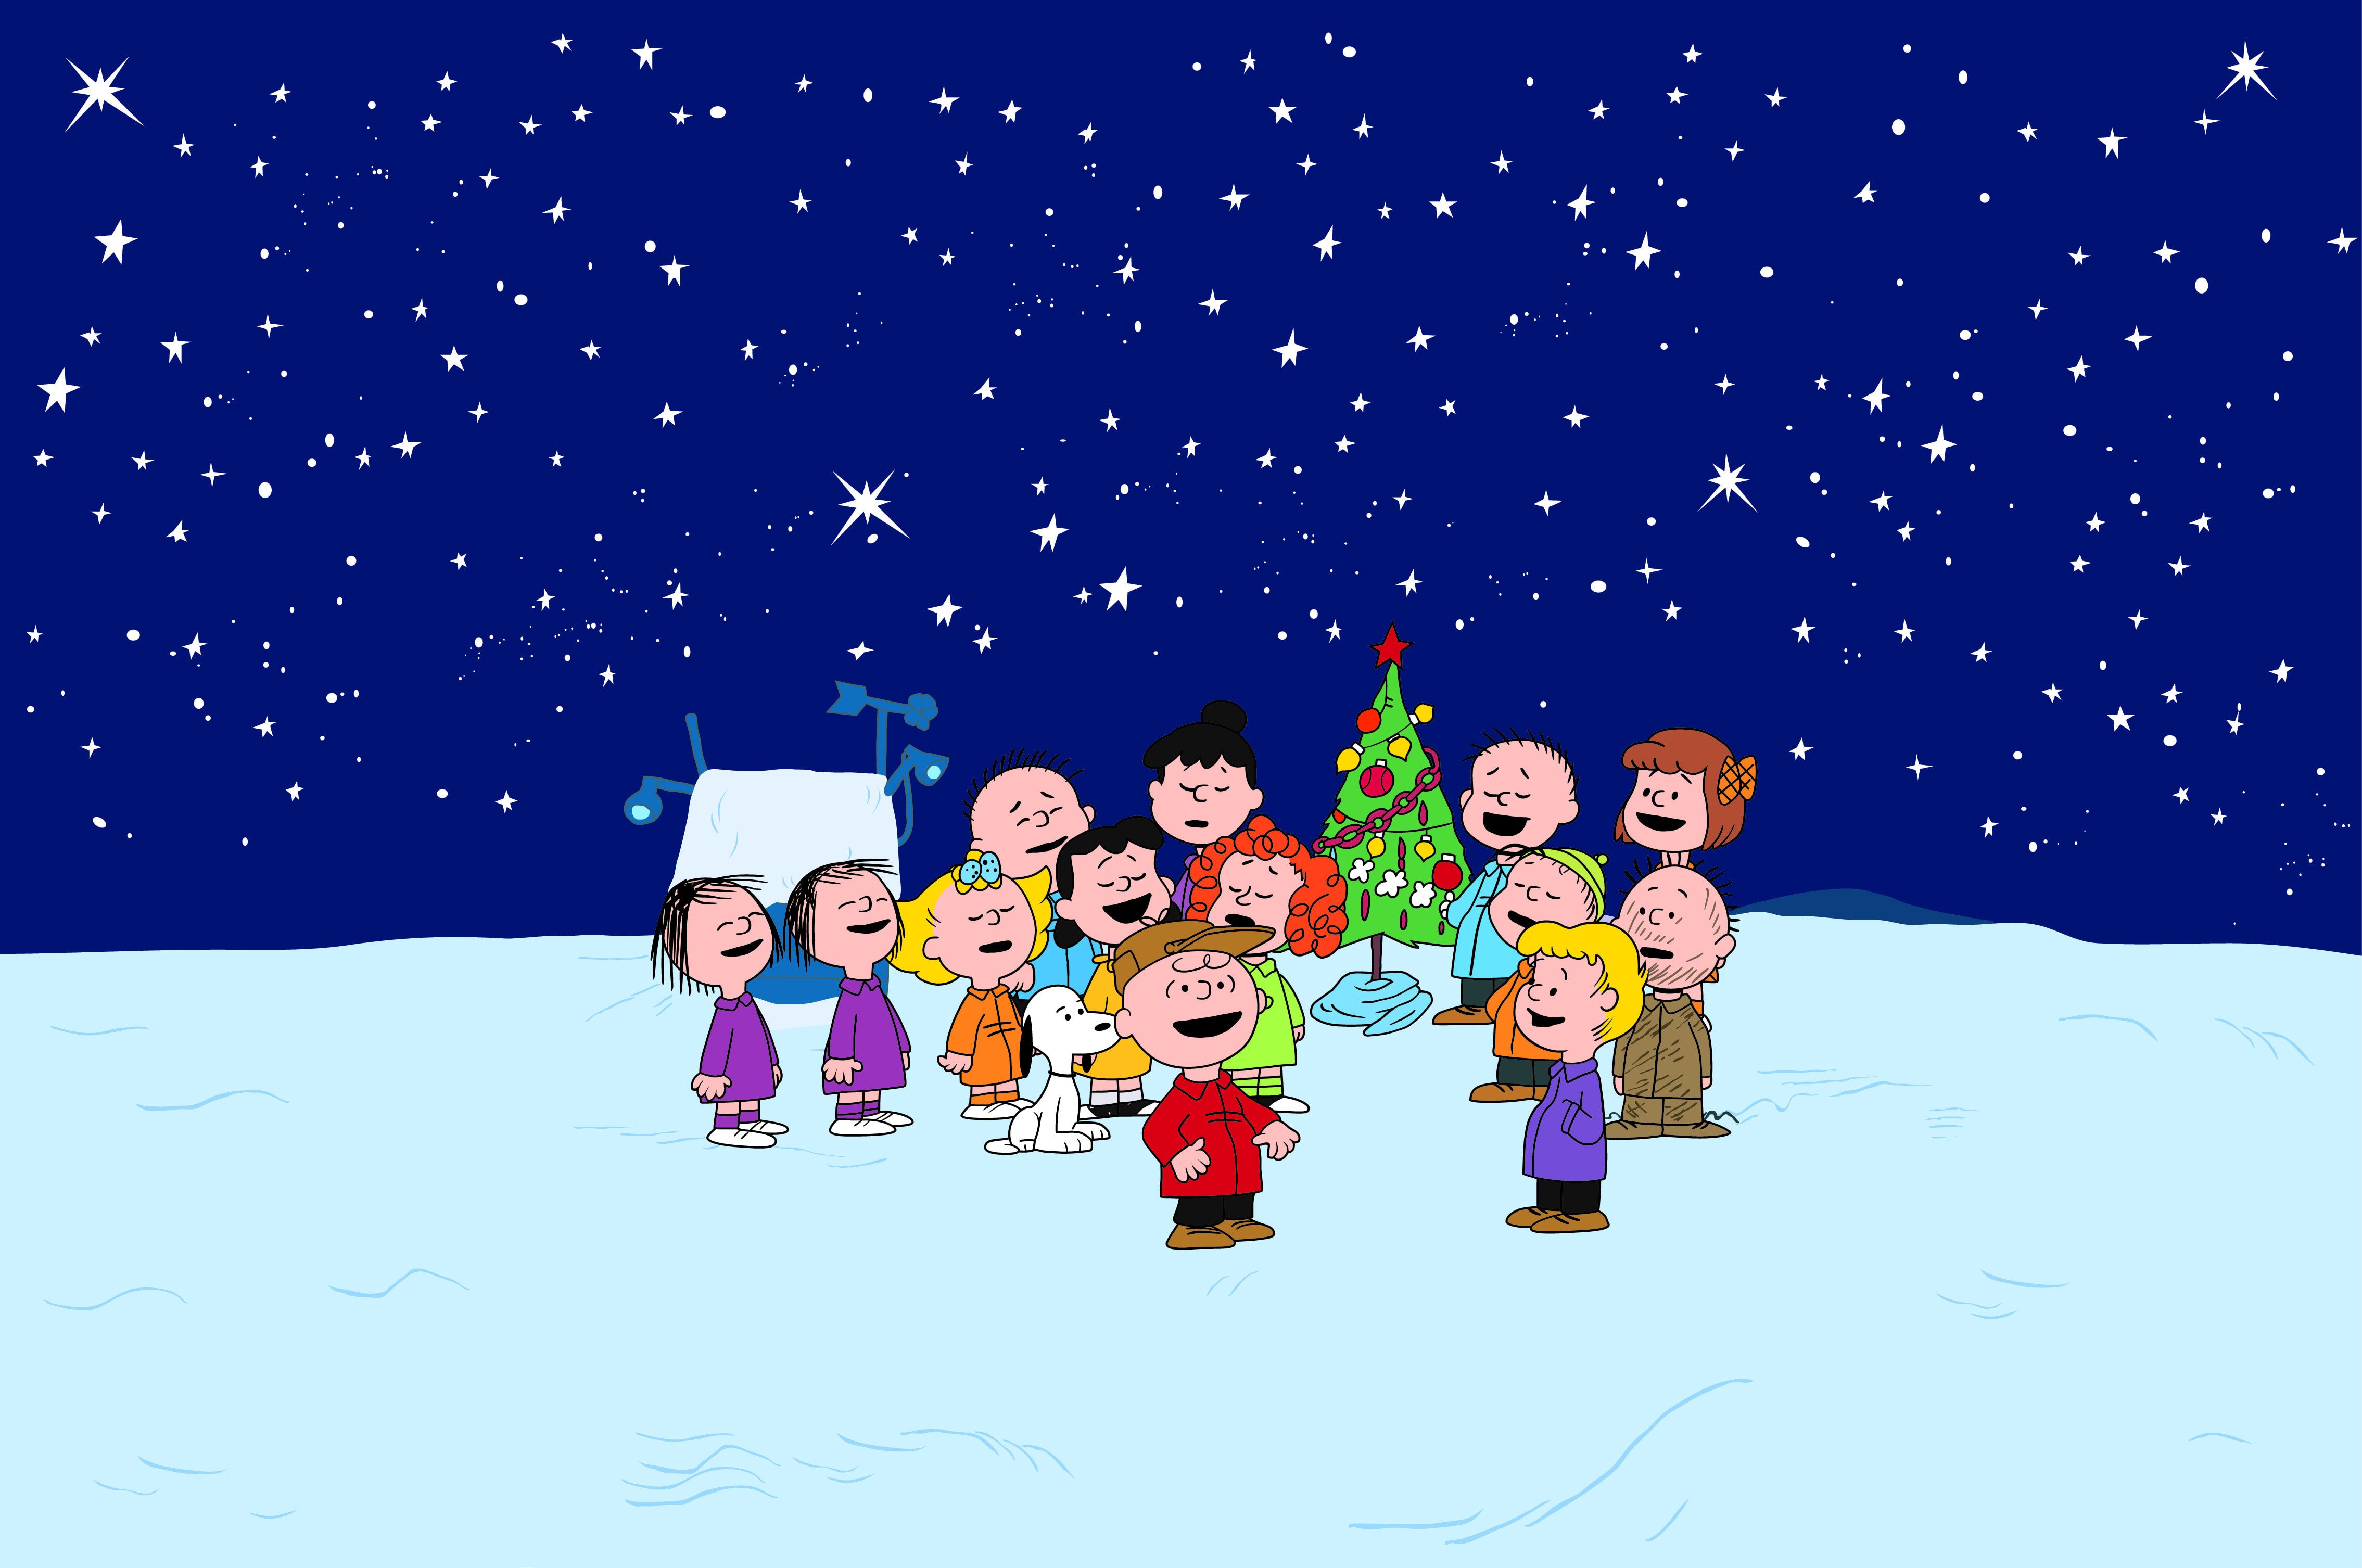 Scene of the Peanuts around the Christmas tree in 'A Charlie Brown Christmas'